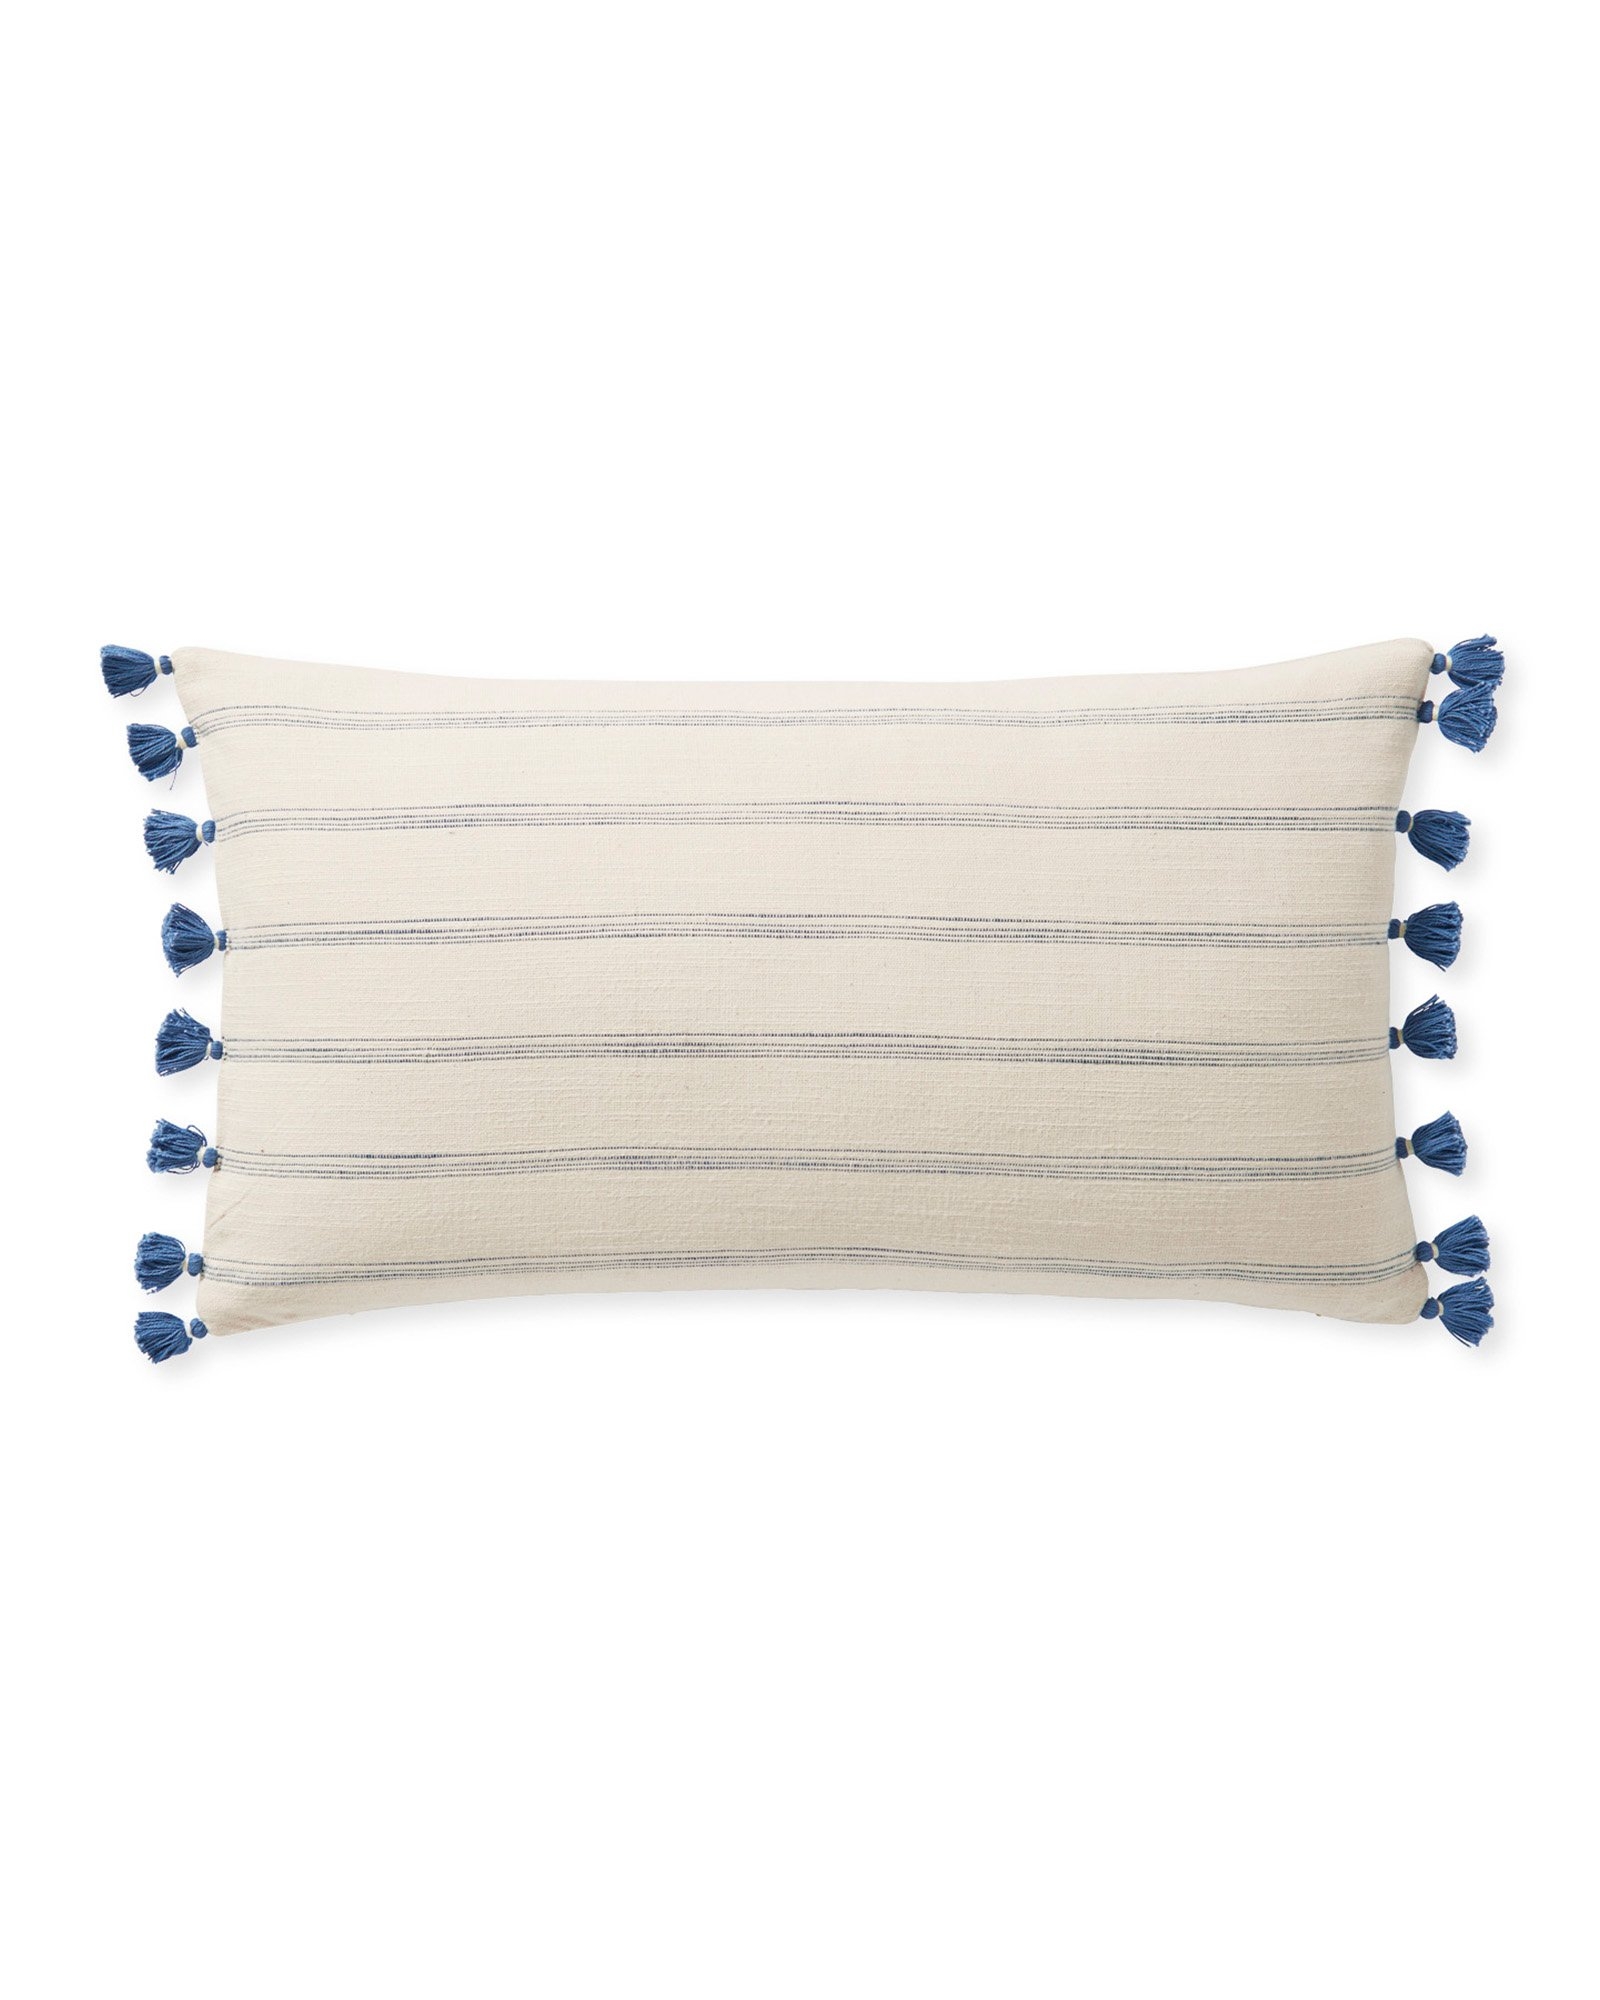 Alsworth 12" x 21" Pillow Cover - Washed Indigo - Insert sold separately - Image 0